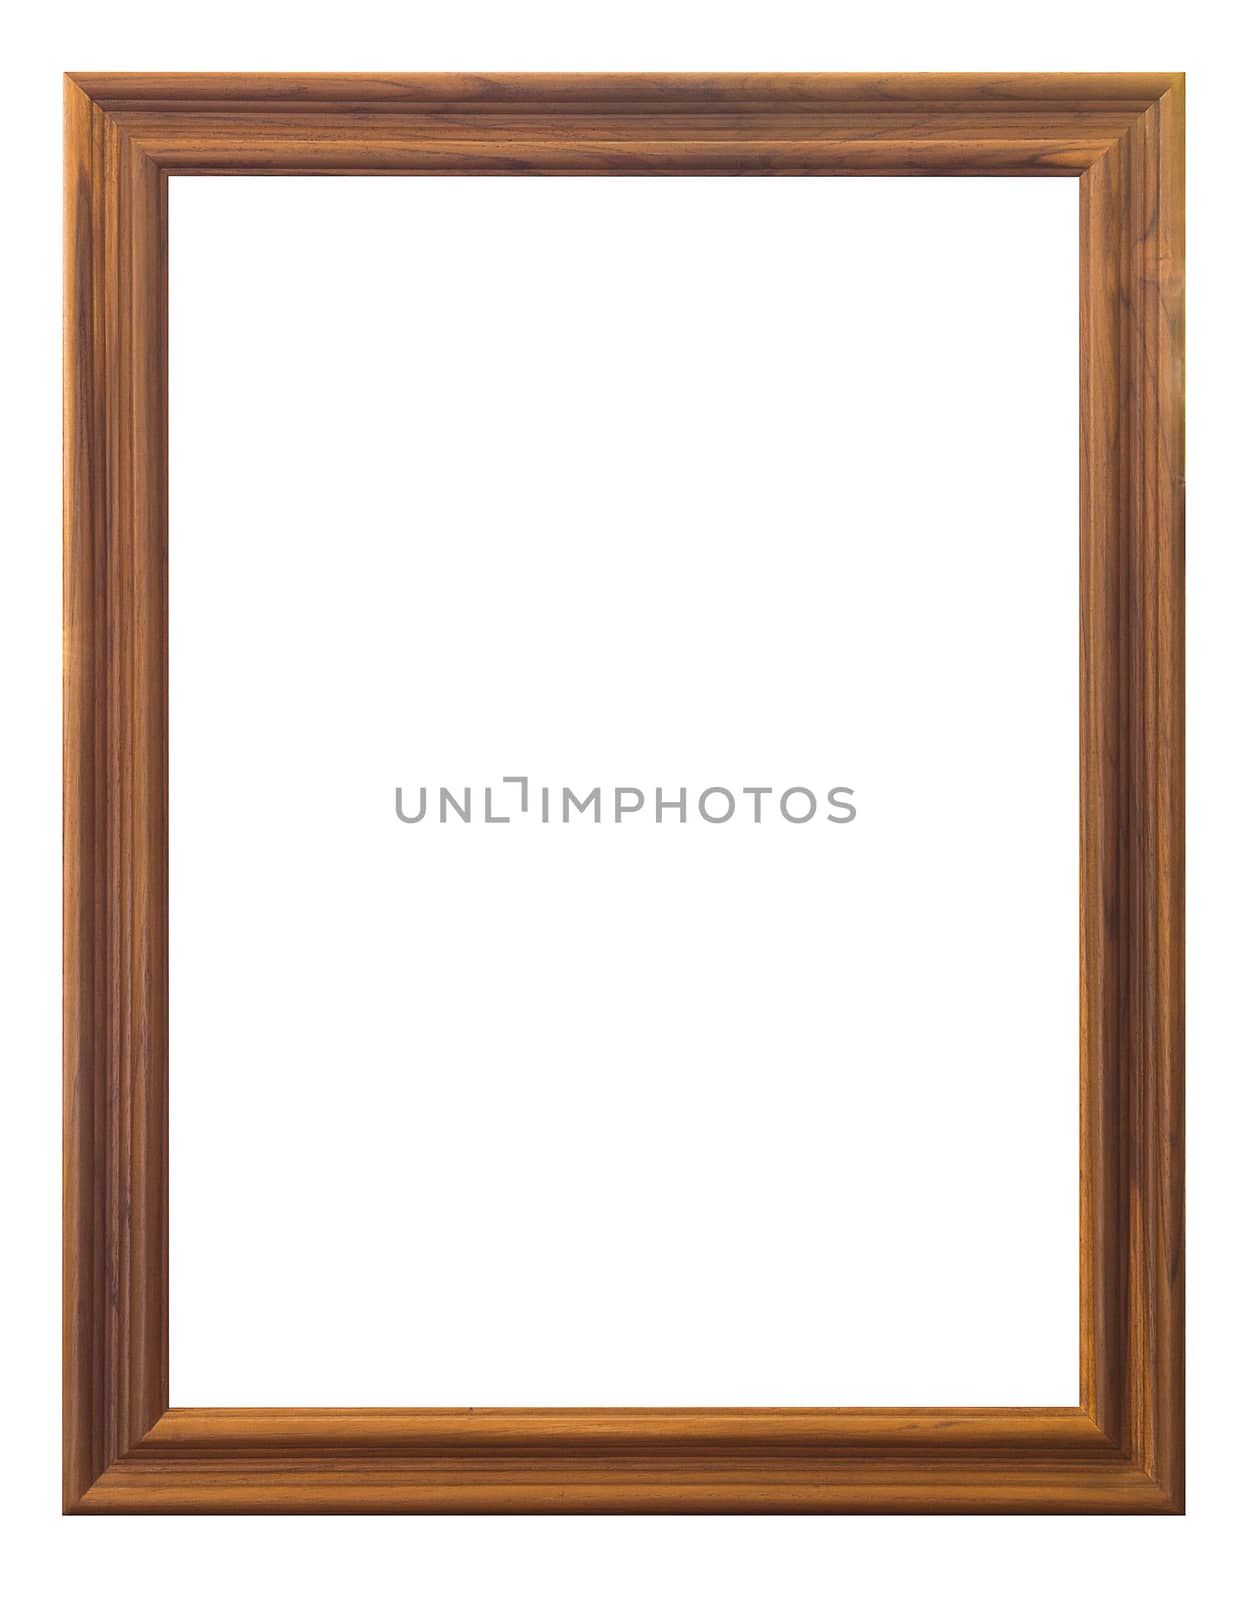 Isolate wooden frame on white background, vintage and retro style